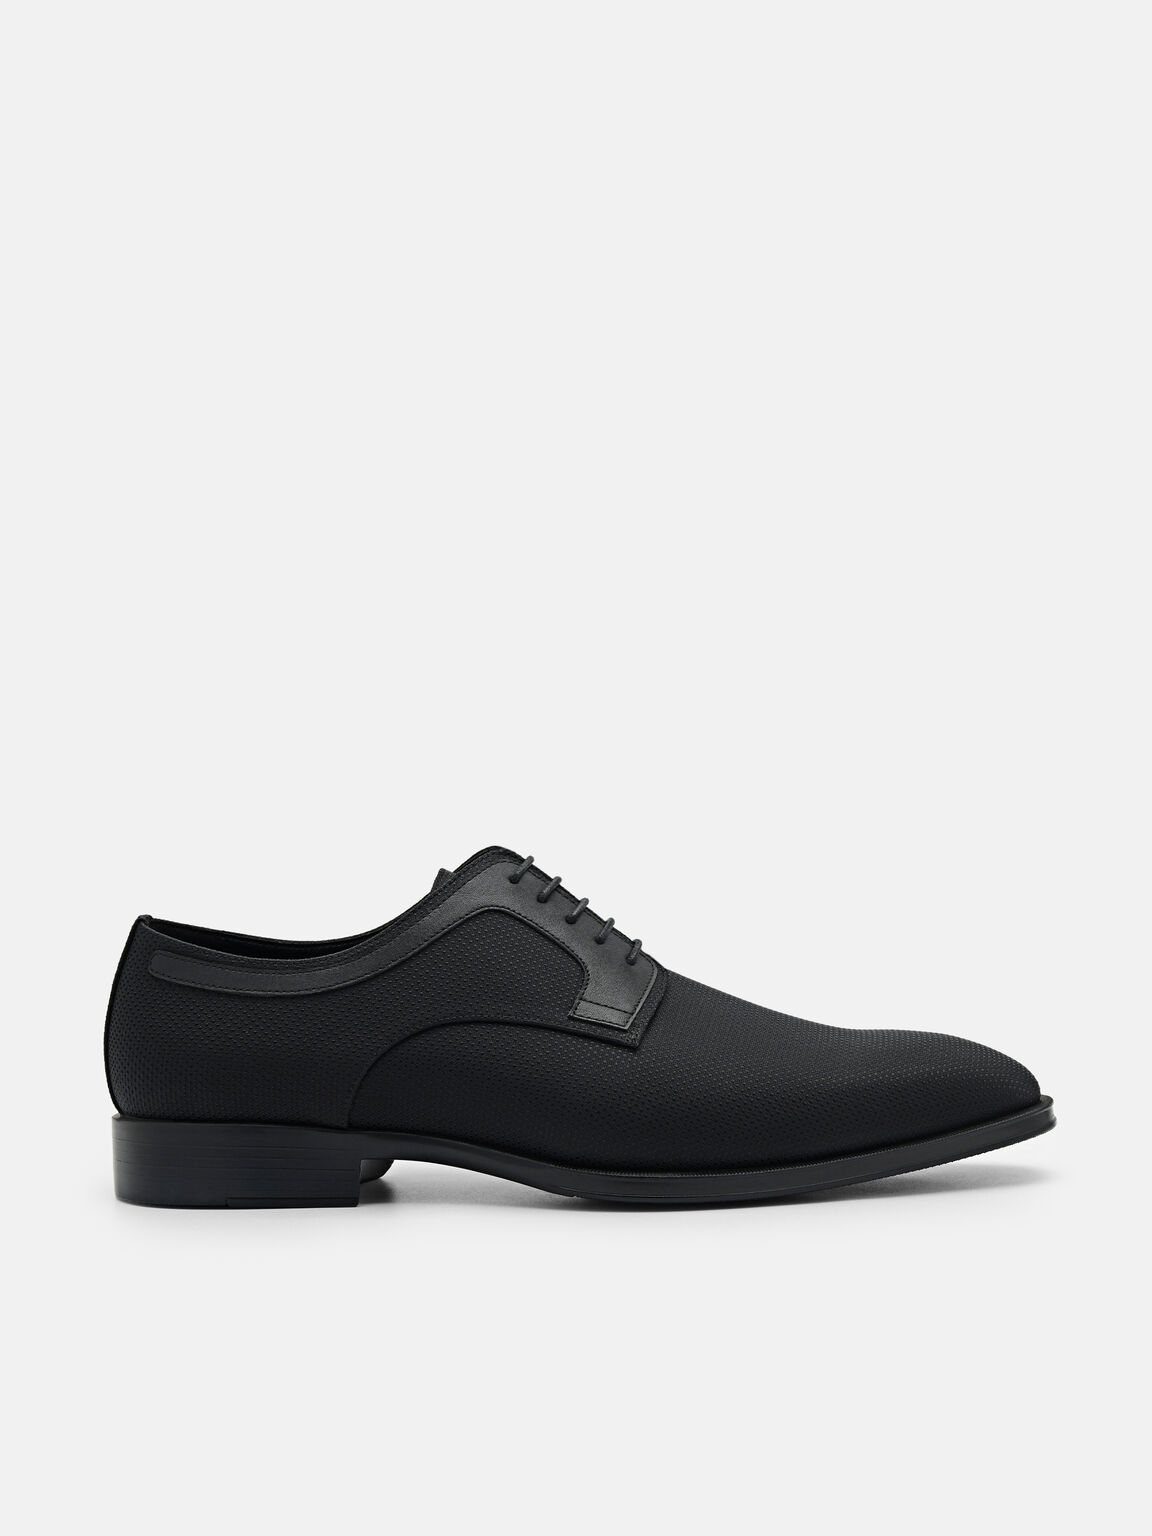 Nylon and Leather Derby Shoes, Black, hi-res